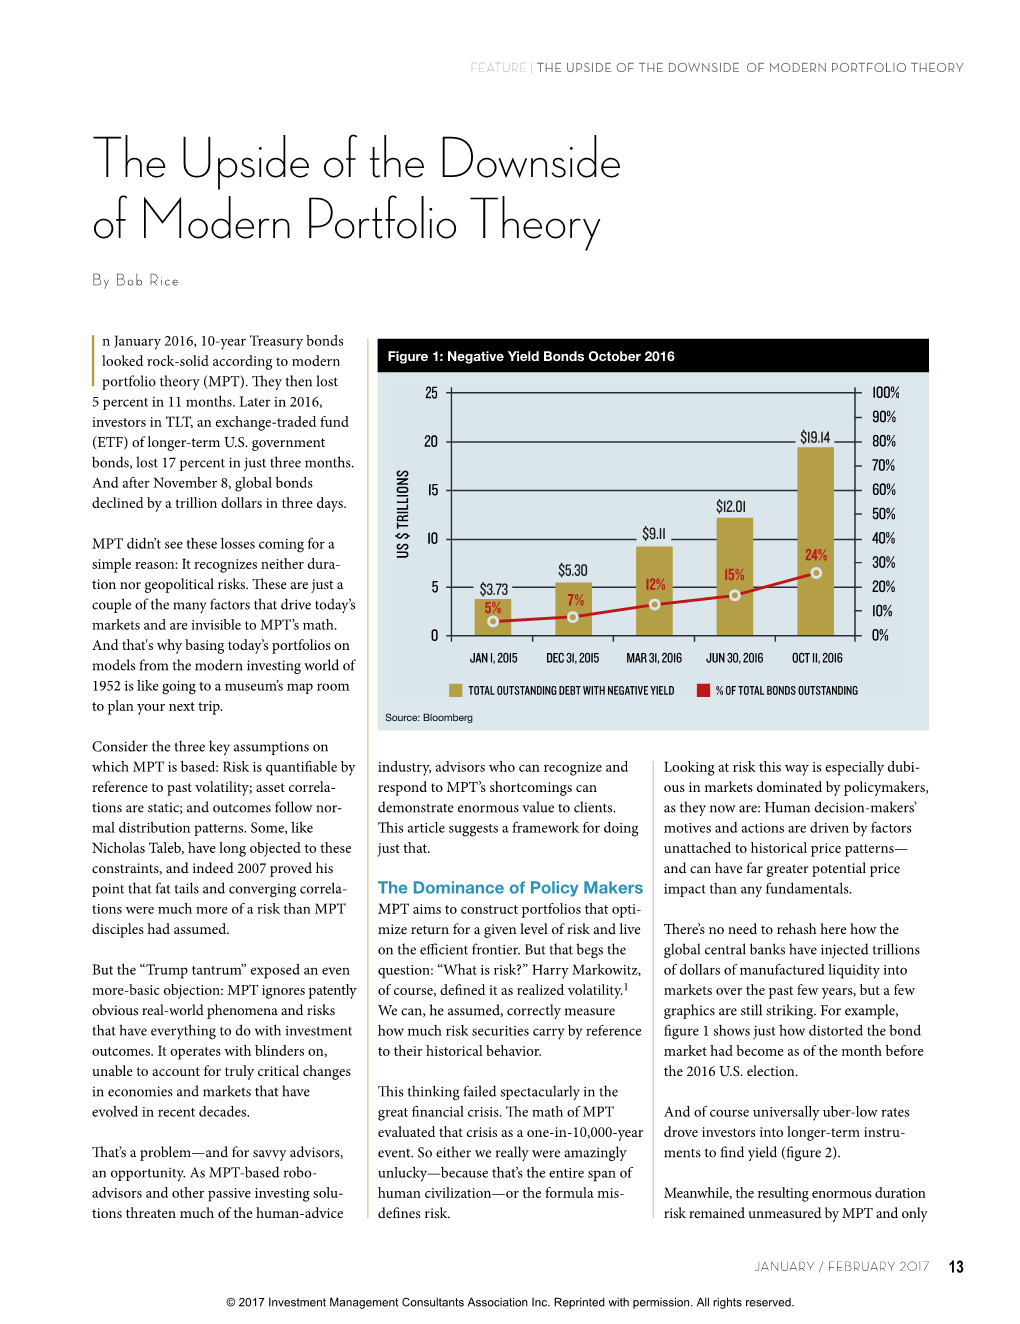 The Upside of the Downside of Modern Portfolio Theory the Upside of the Downside of Modern Portfolio Theory